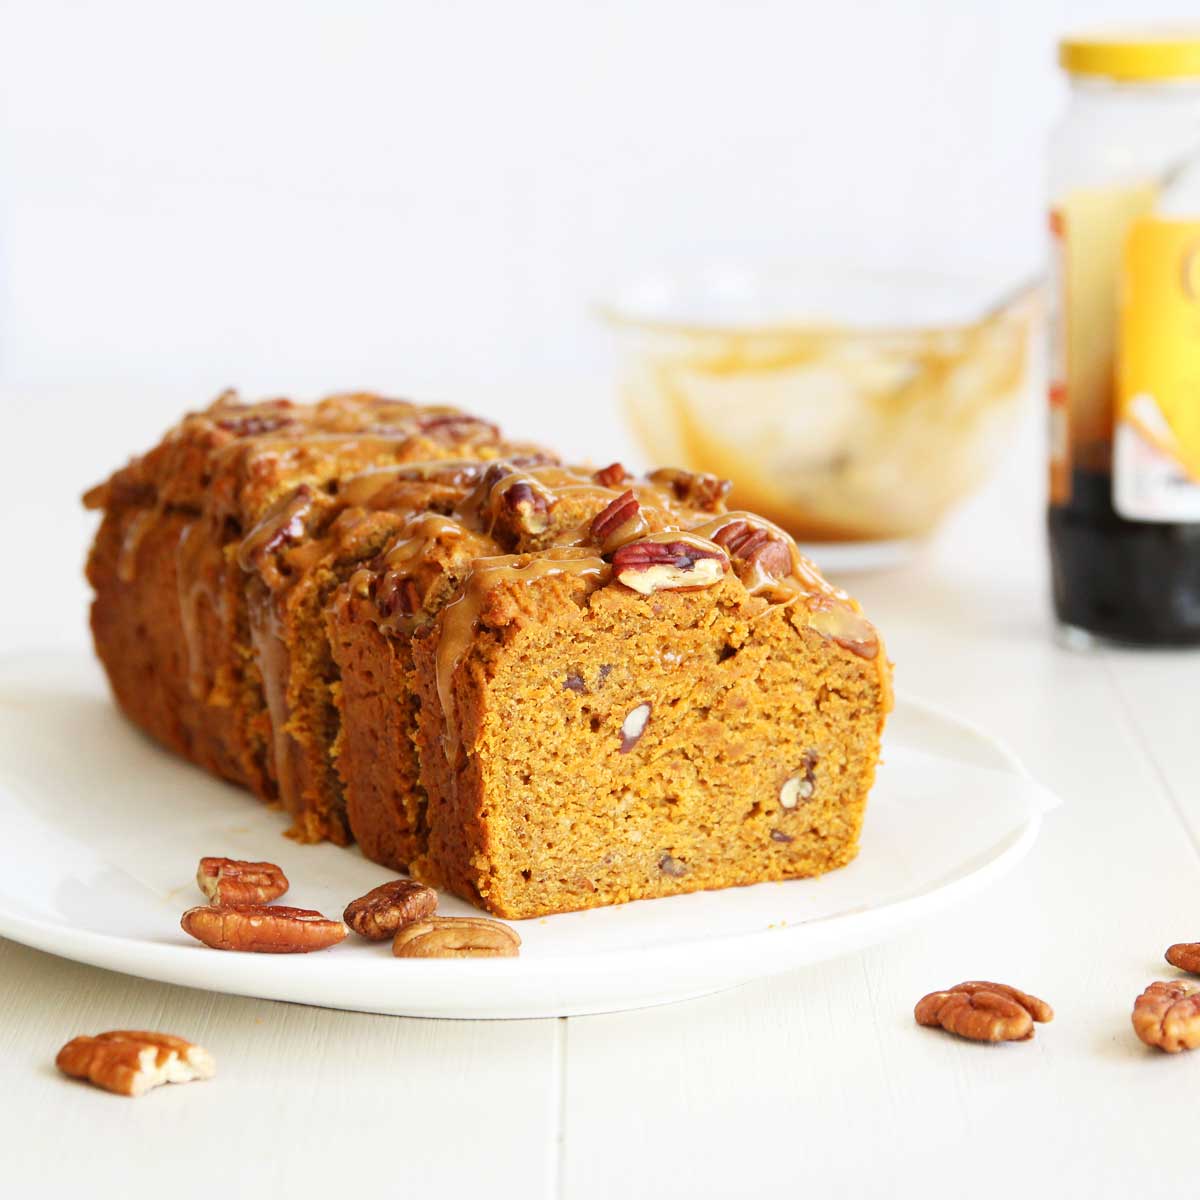 Molasses Pumpkin Bread With Pecan Nuts (No Eggs Or Dairy Required!) - Sweet Potato Swiss Roll Cake